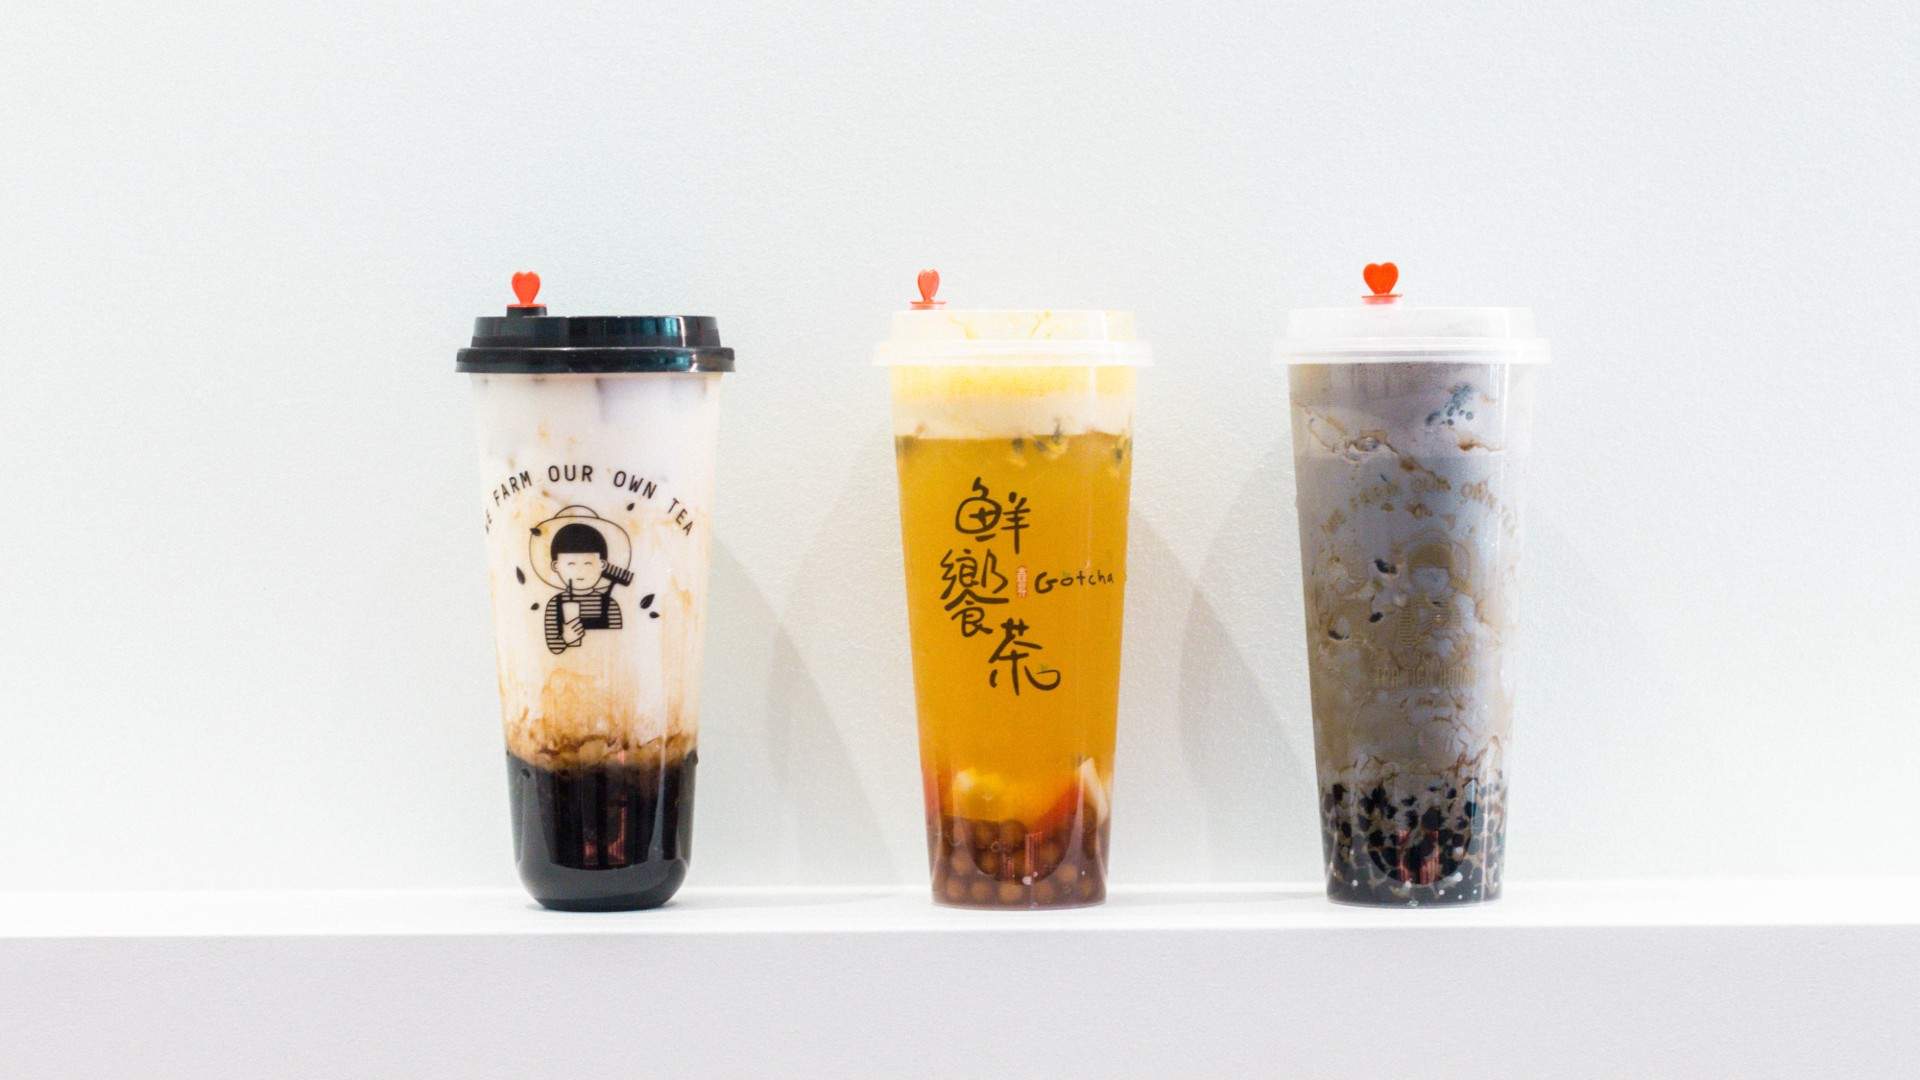 Melbourne's Luxe Bubble Tea Chain Is Opening Its First Two Sydney Stores This Week